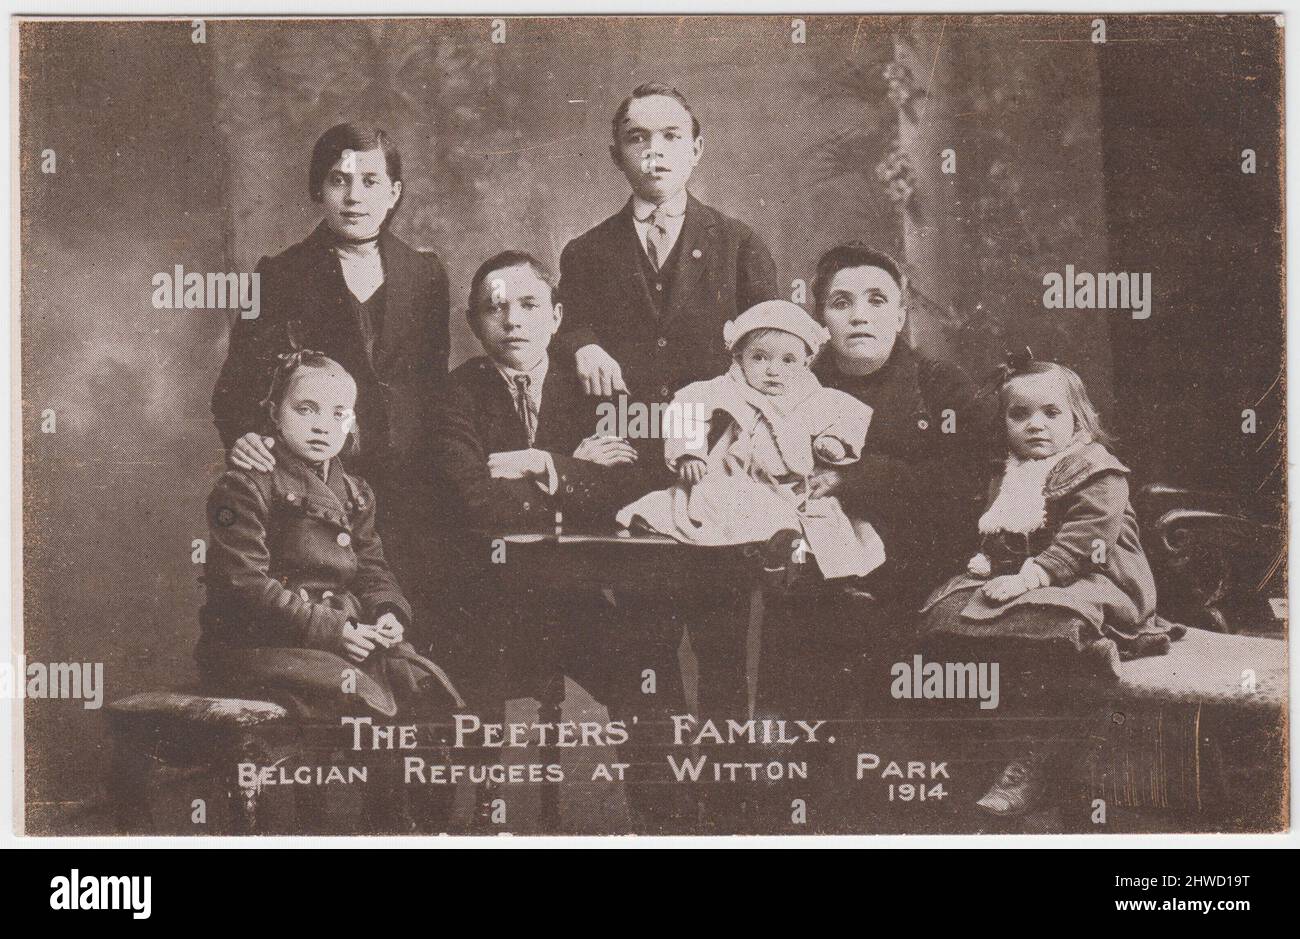 The Peeters family, Belgian refugees at Witton Park, County Durham, 1914. The father of the family, Jaen or Joannes Peeters, had been coachman to the burgomaster of Aerschot and was amongst the men of the town shot dead by members of the invading German army in reprisals for the killing of Colonel Johannes Stenger. His two 16 year old sons narrowly escaped the same fate but witnessed the execution of their father Stock Photo